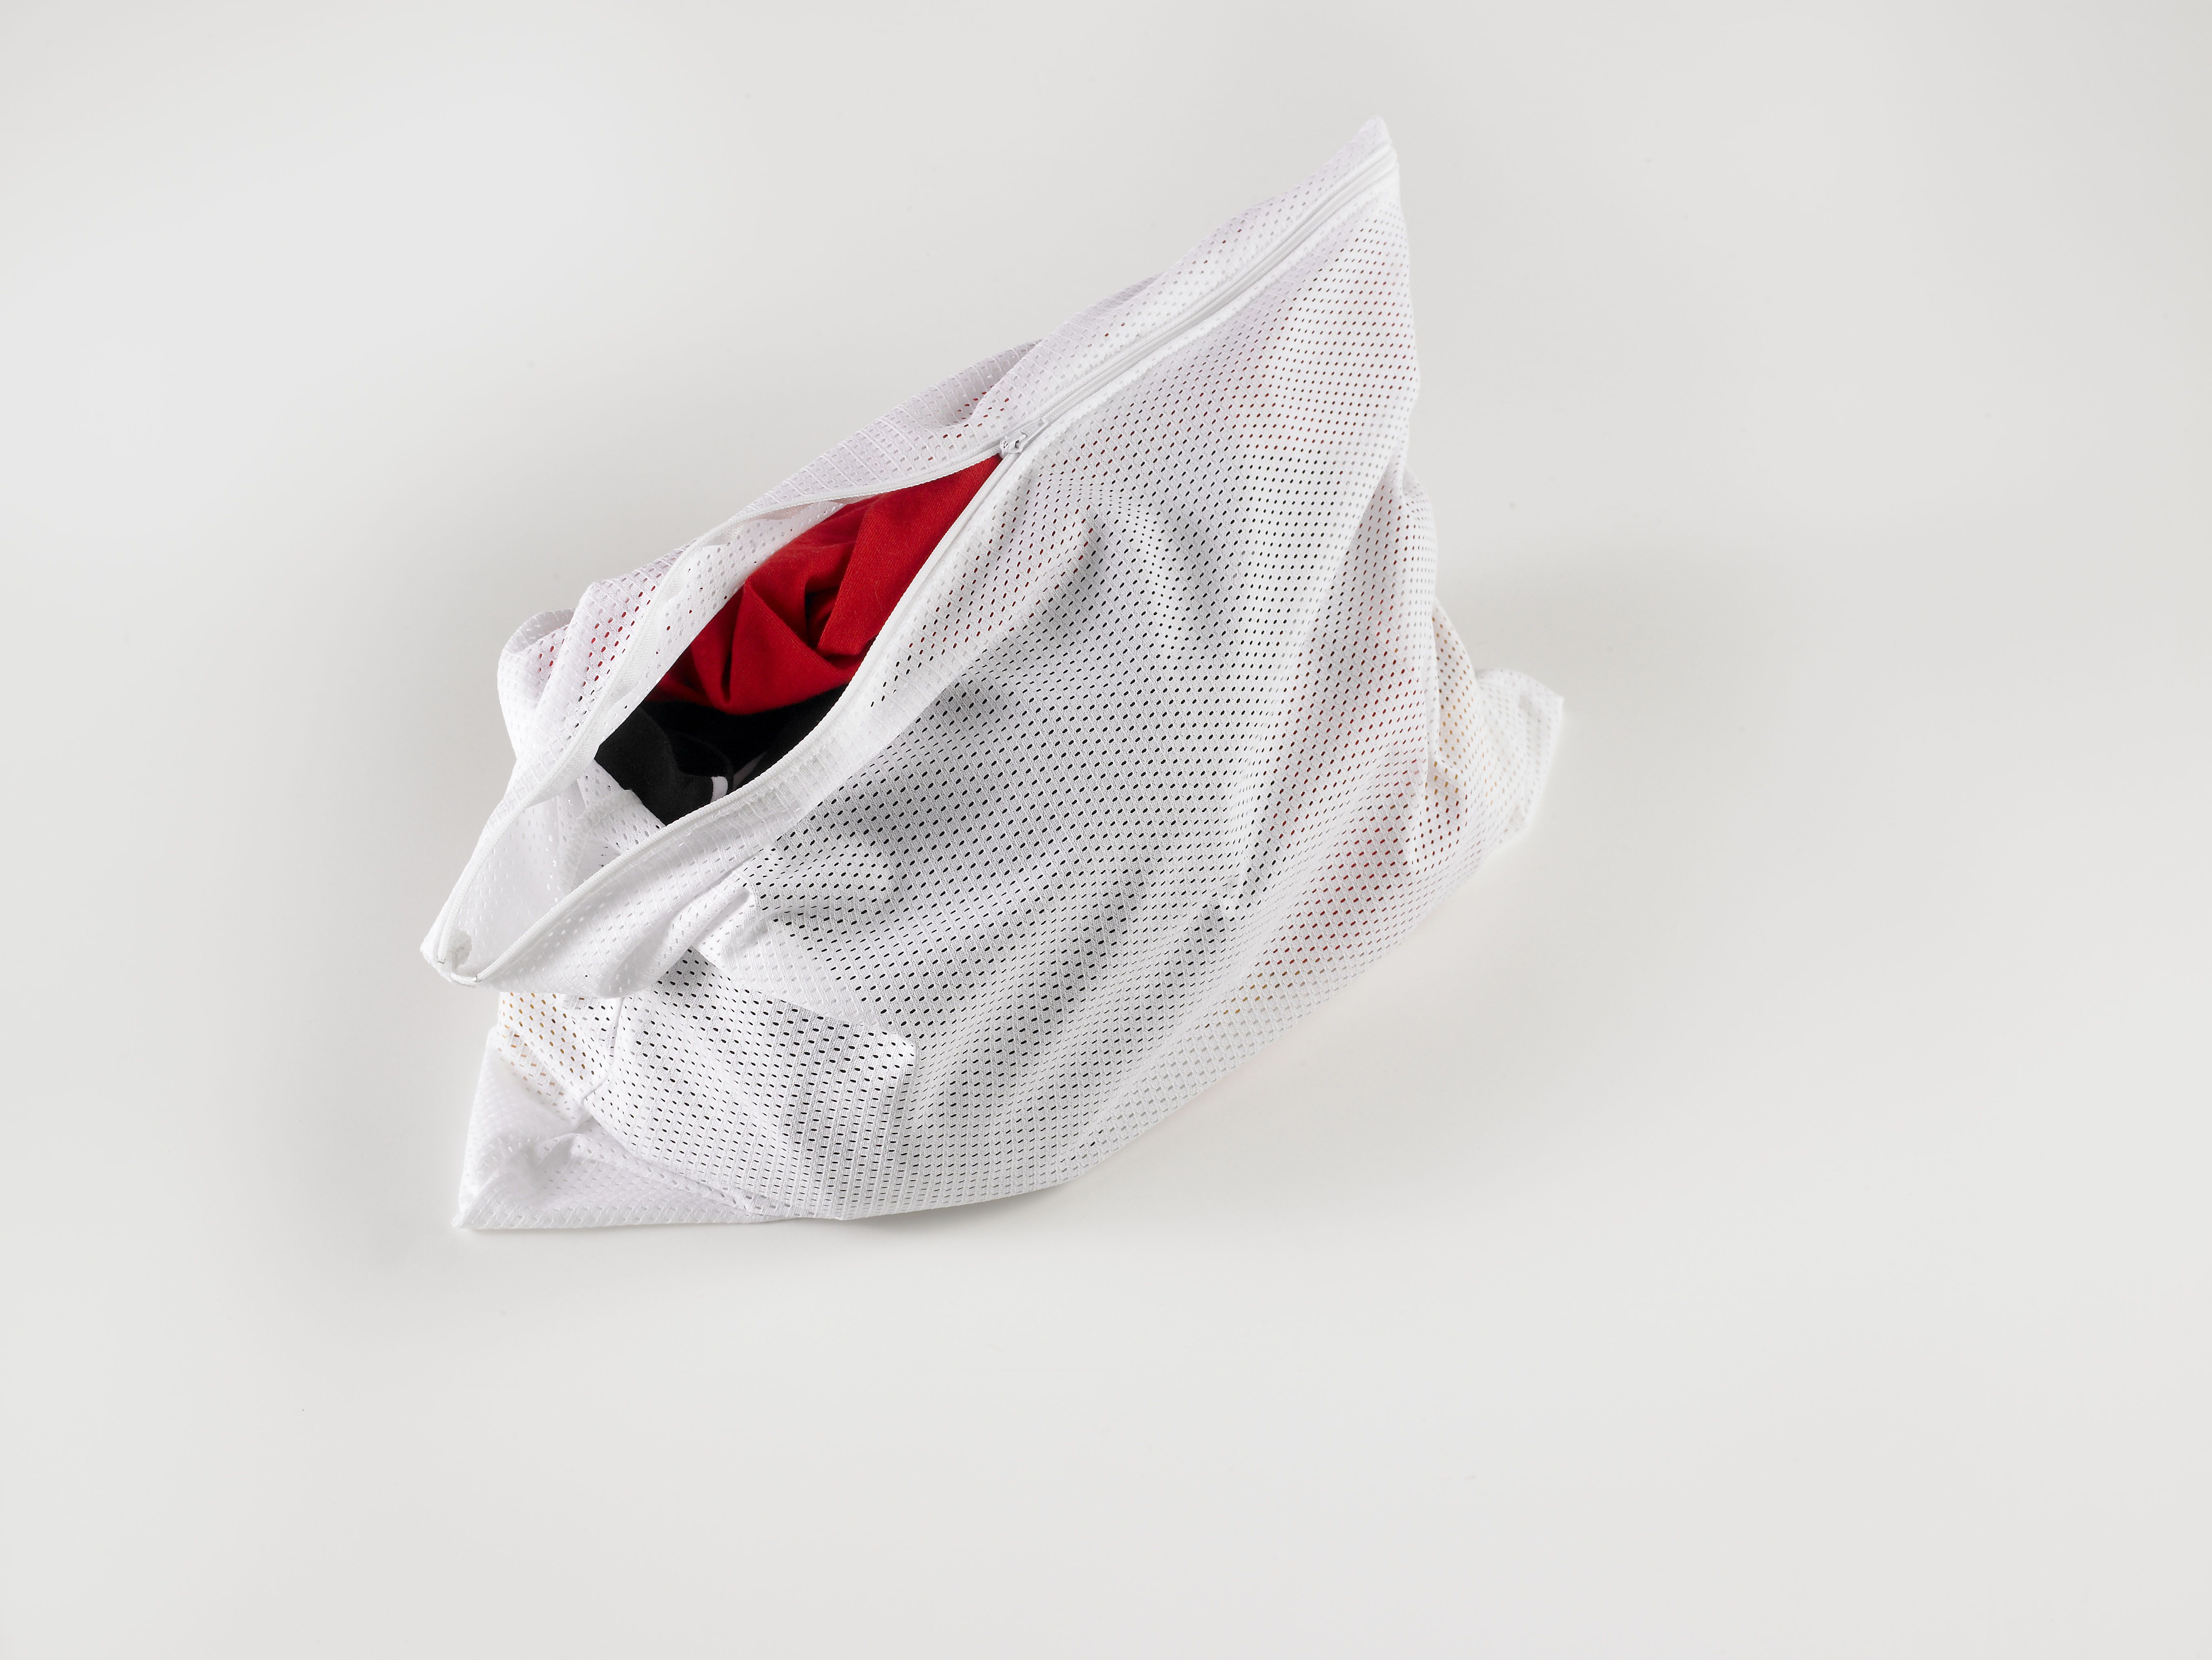 Zippered Mesh Laundry Bags (For Personal Clothing)